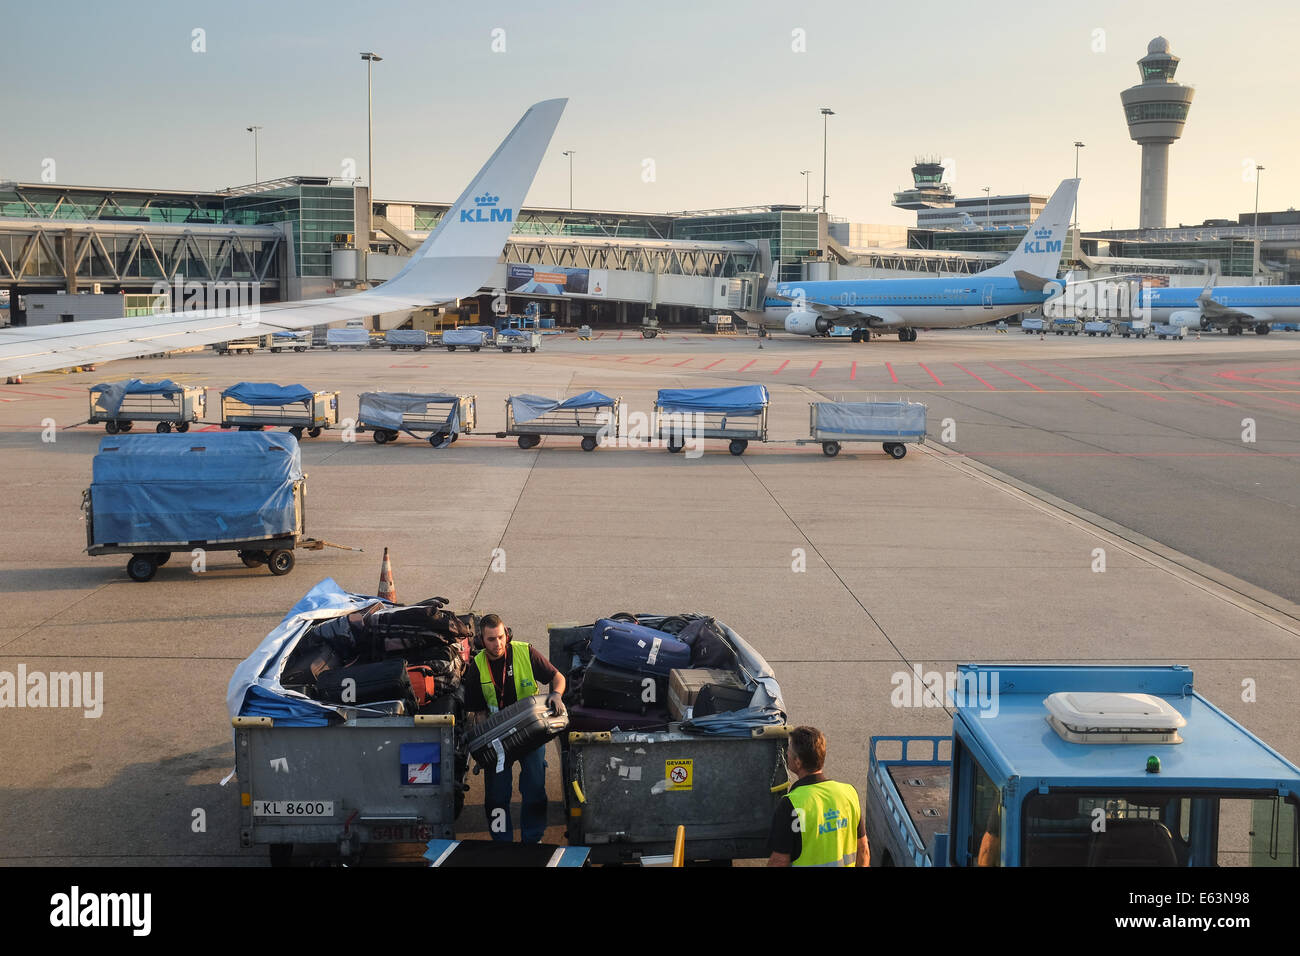 Handling luggage for a KLM flight, in Schiphol Amsterdam Airport, Holland, Europe Stock Photo